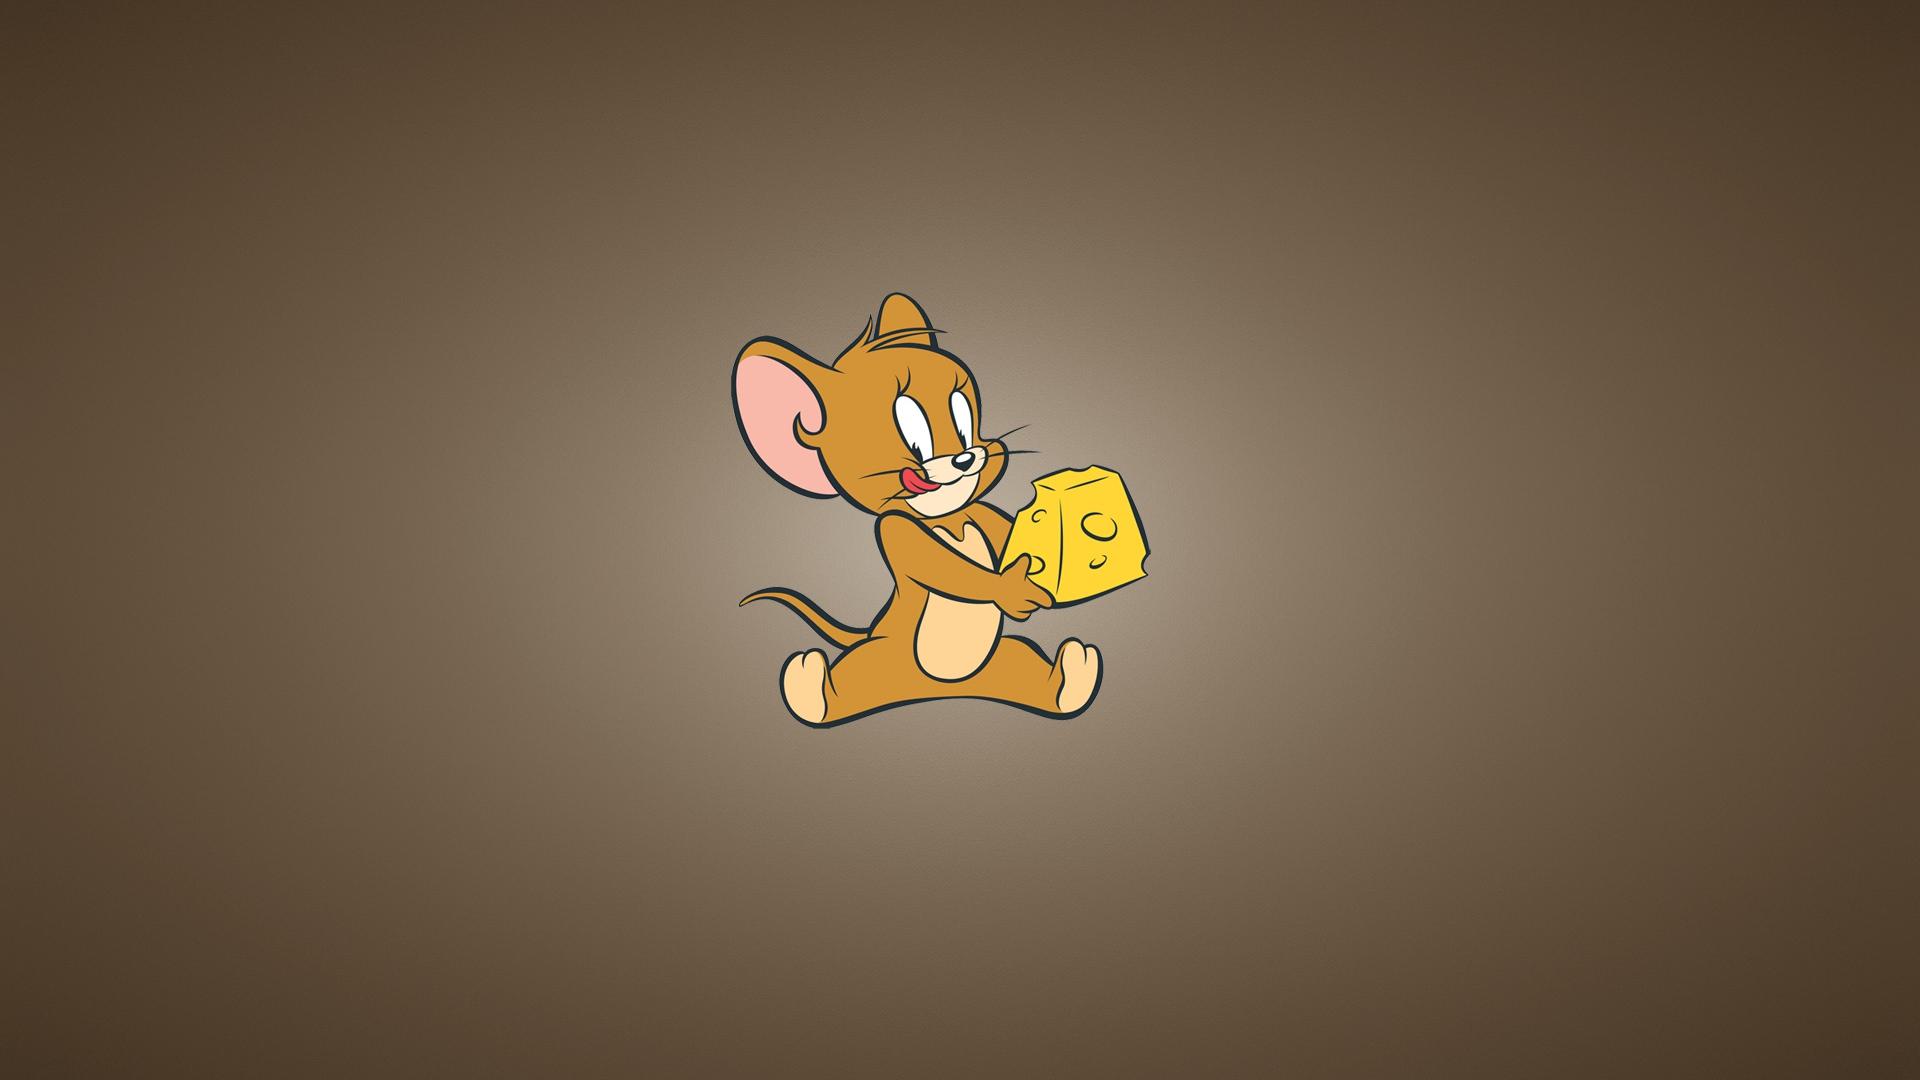 Jerry Mouse Wallpaper. Tom and Jerry